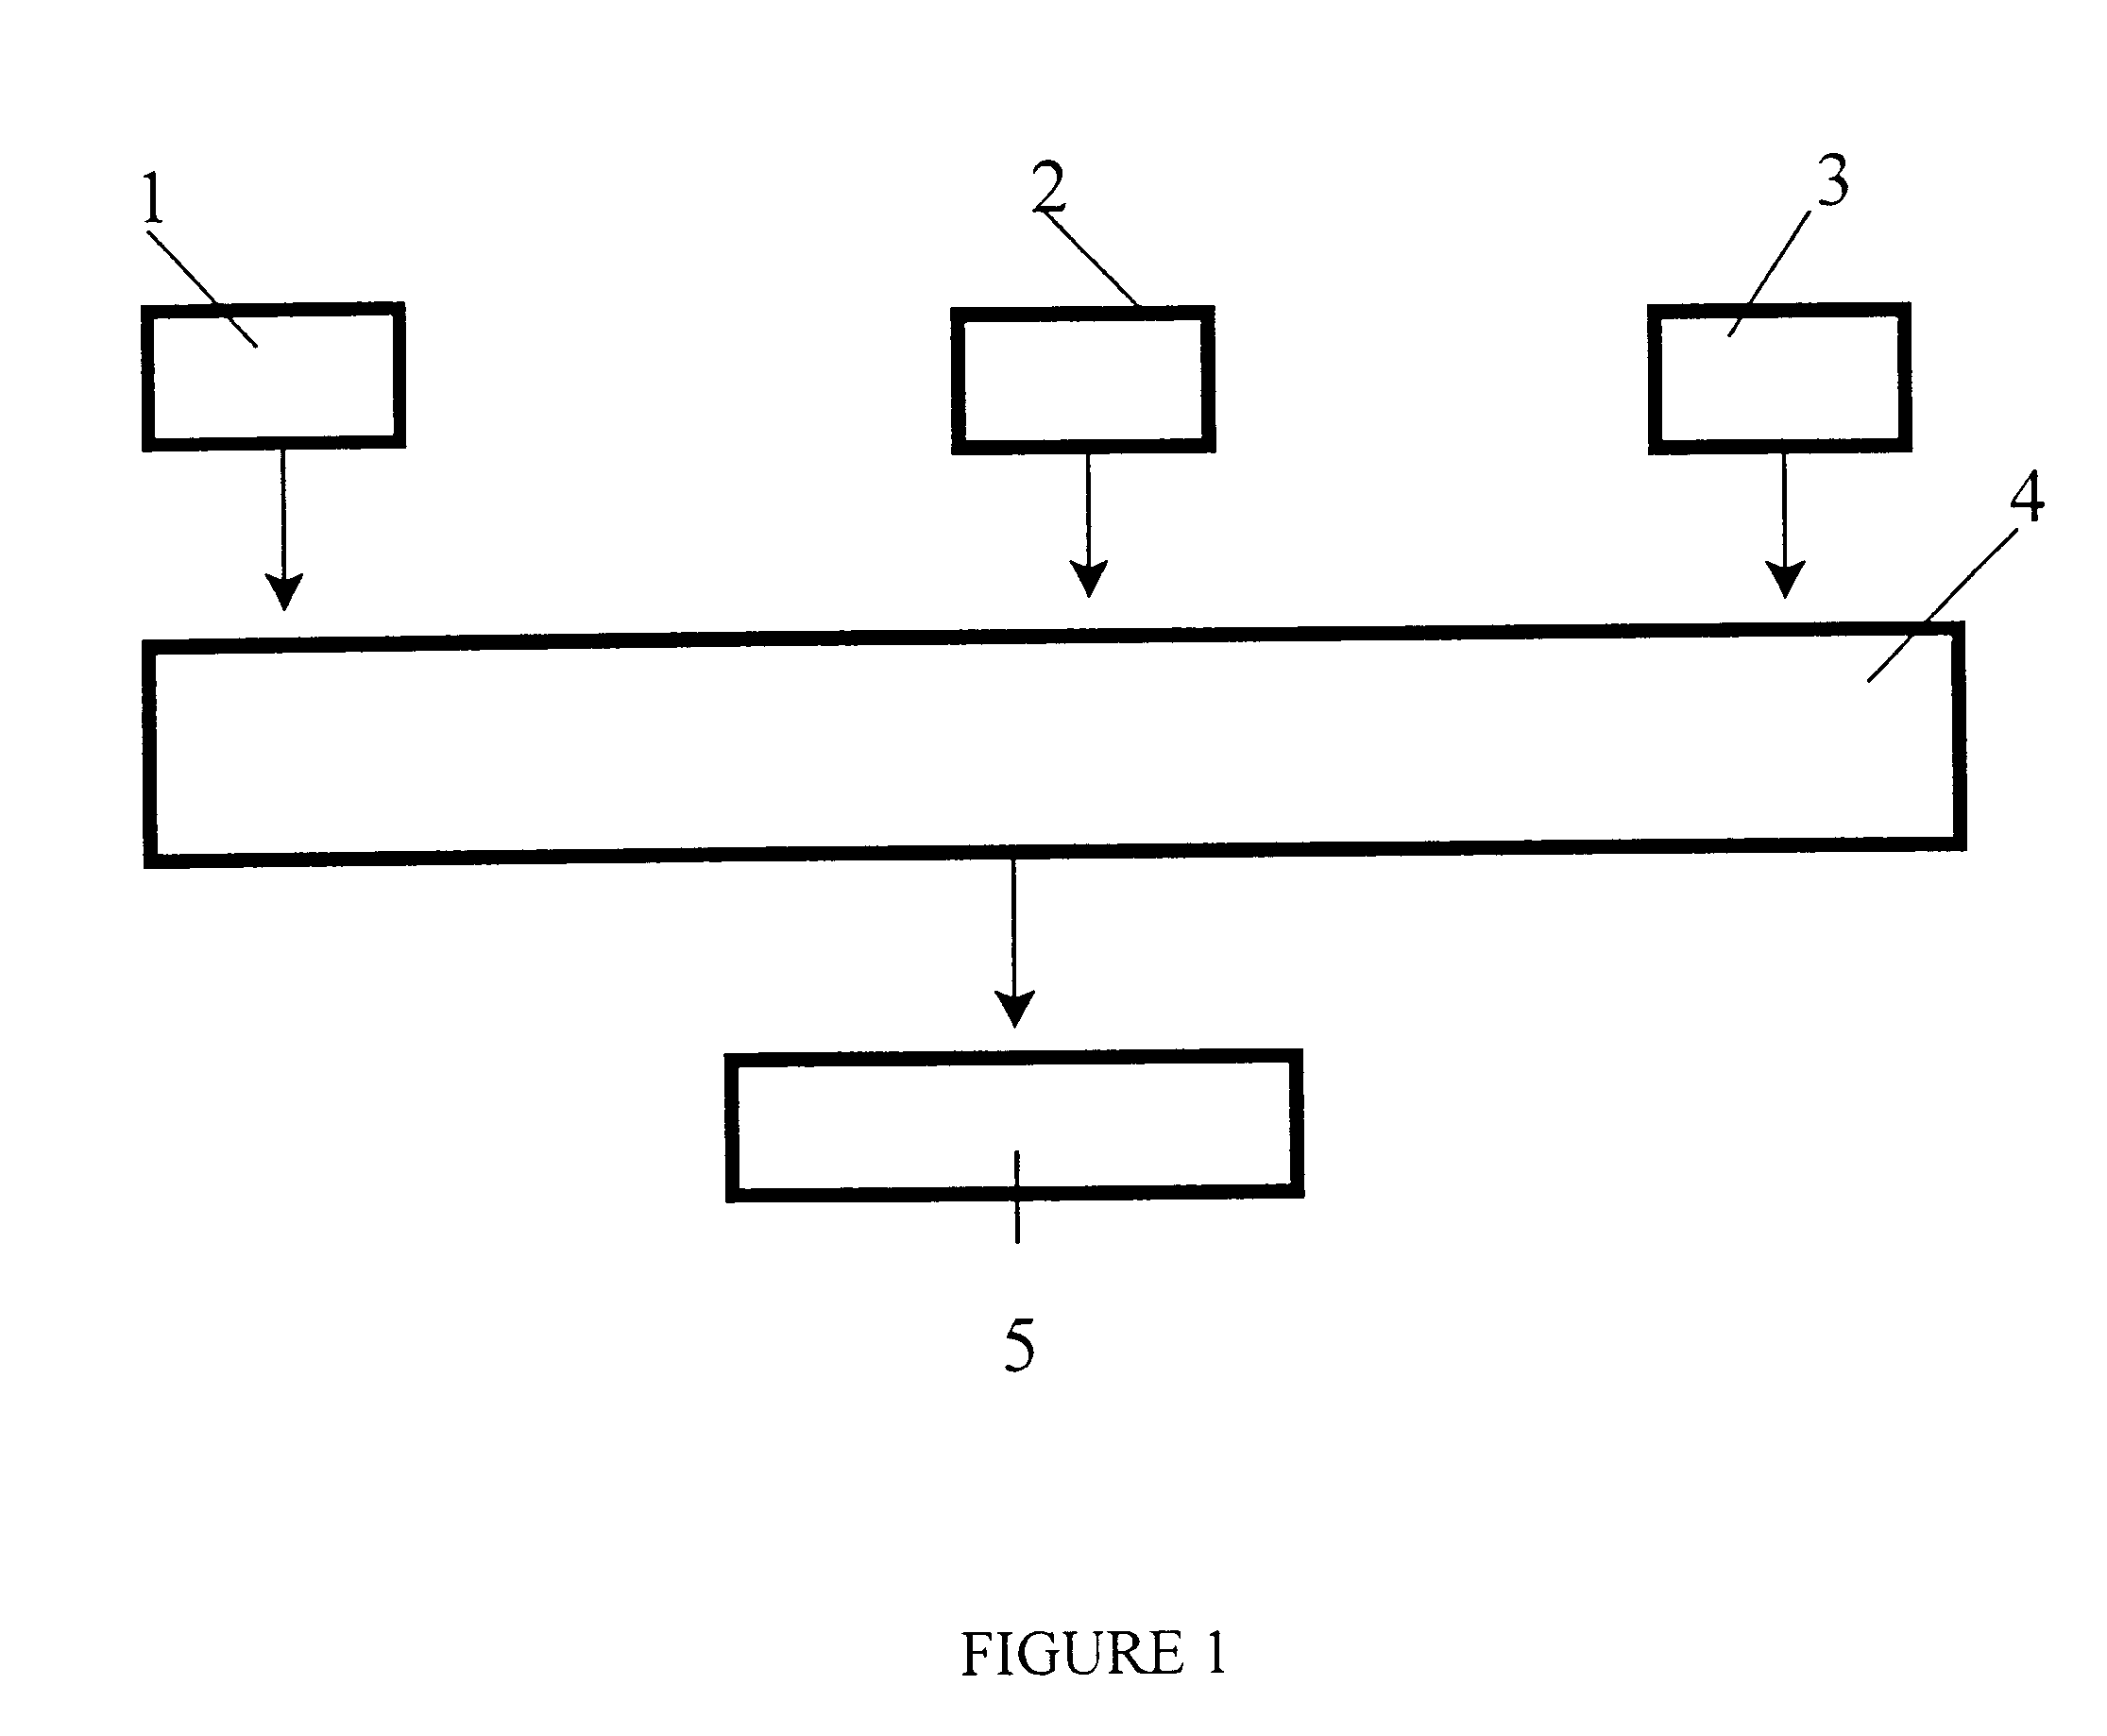 Method and device for adjusting or altering the play between brake linings and friction surfaces of motor vehicle brakes